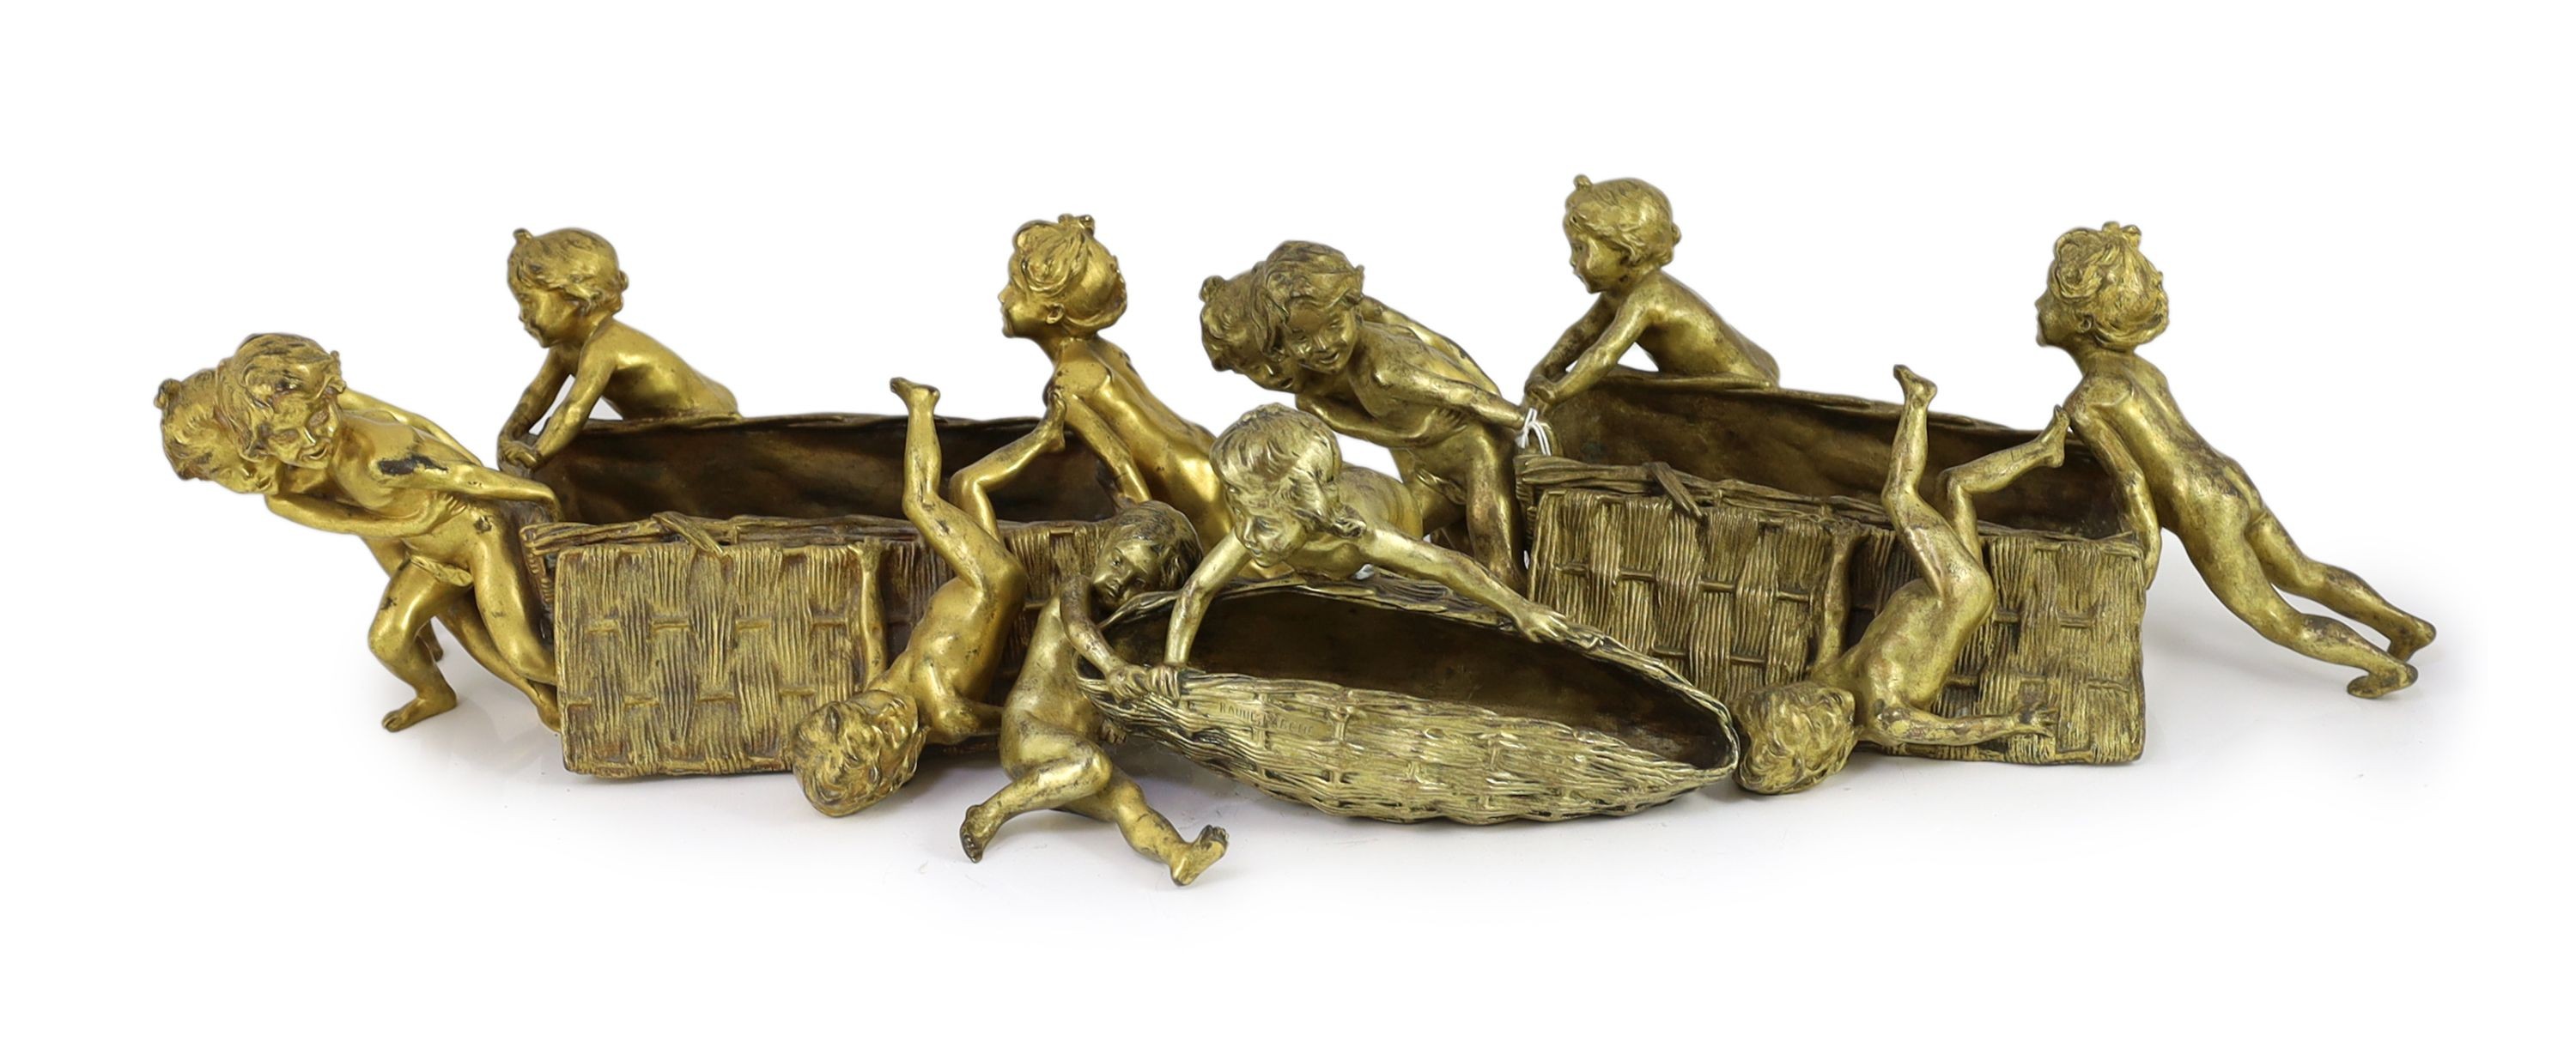 Raoul Francois Larche (French, 1860 - 1912). A set of three ormolu groups of children pushing and pulling large wicker baskets, largest length 45cm height 17cn smaller length 27cm height 16cm